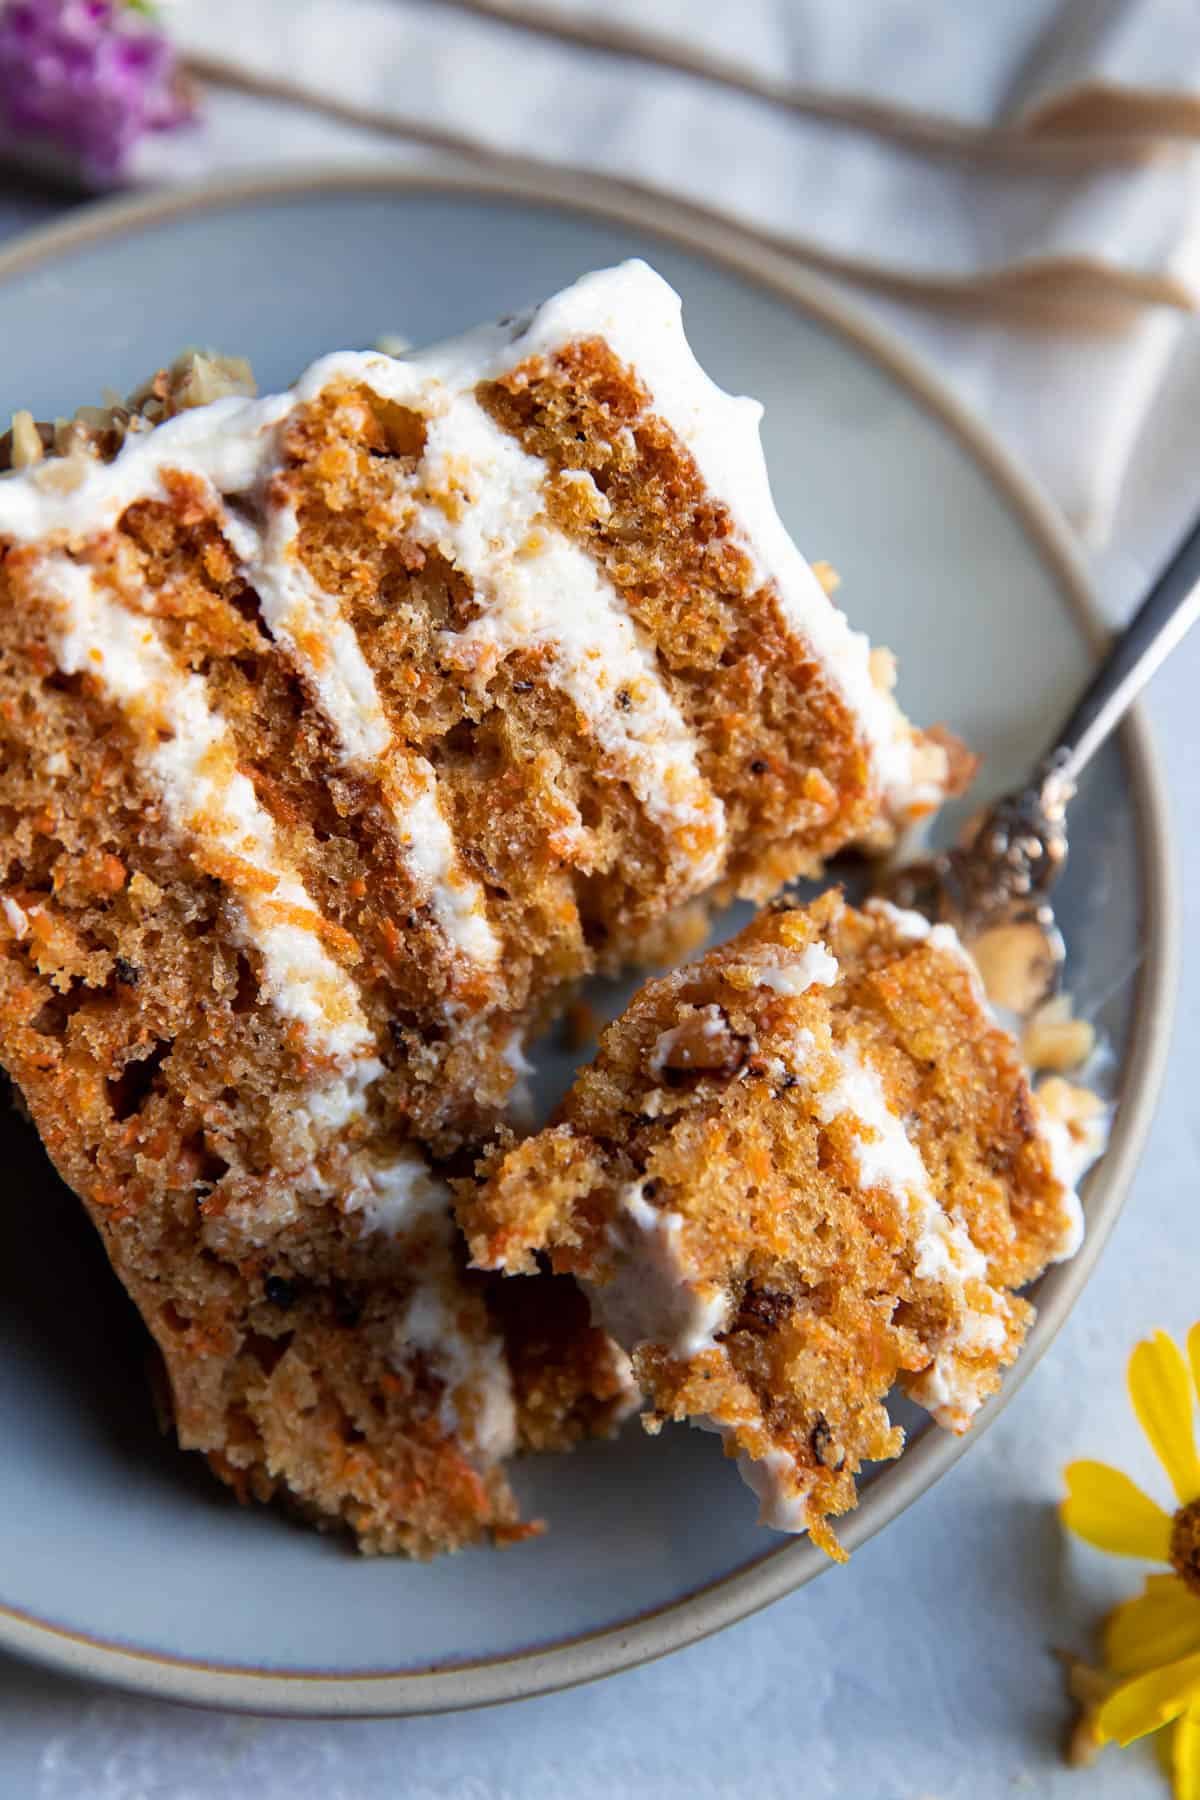 carrot cake on a plate.